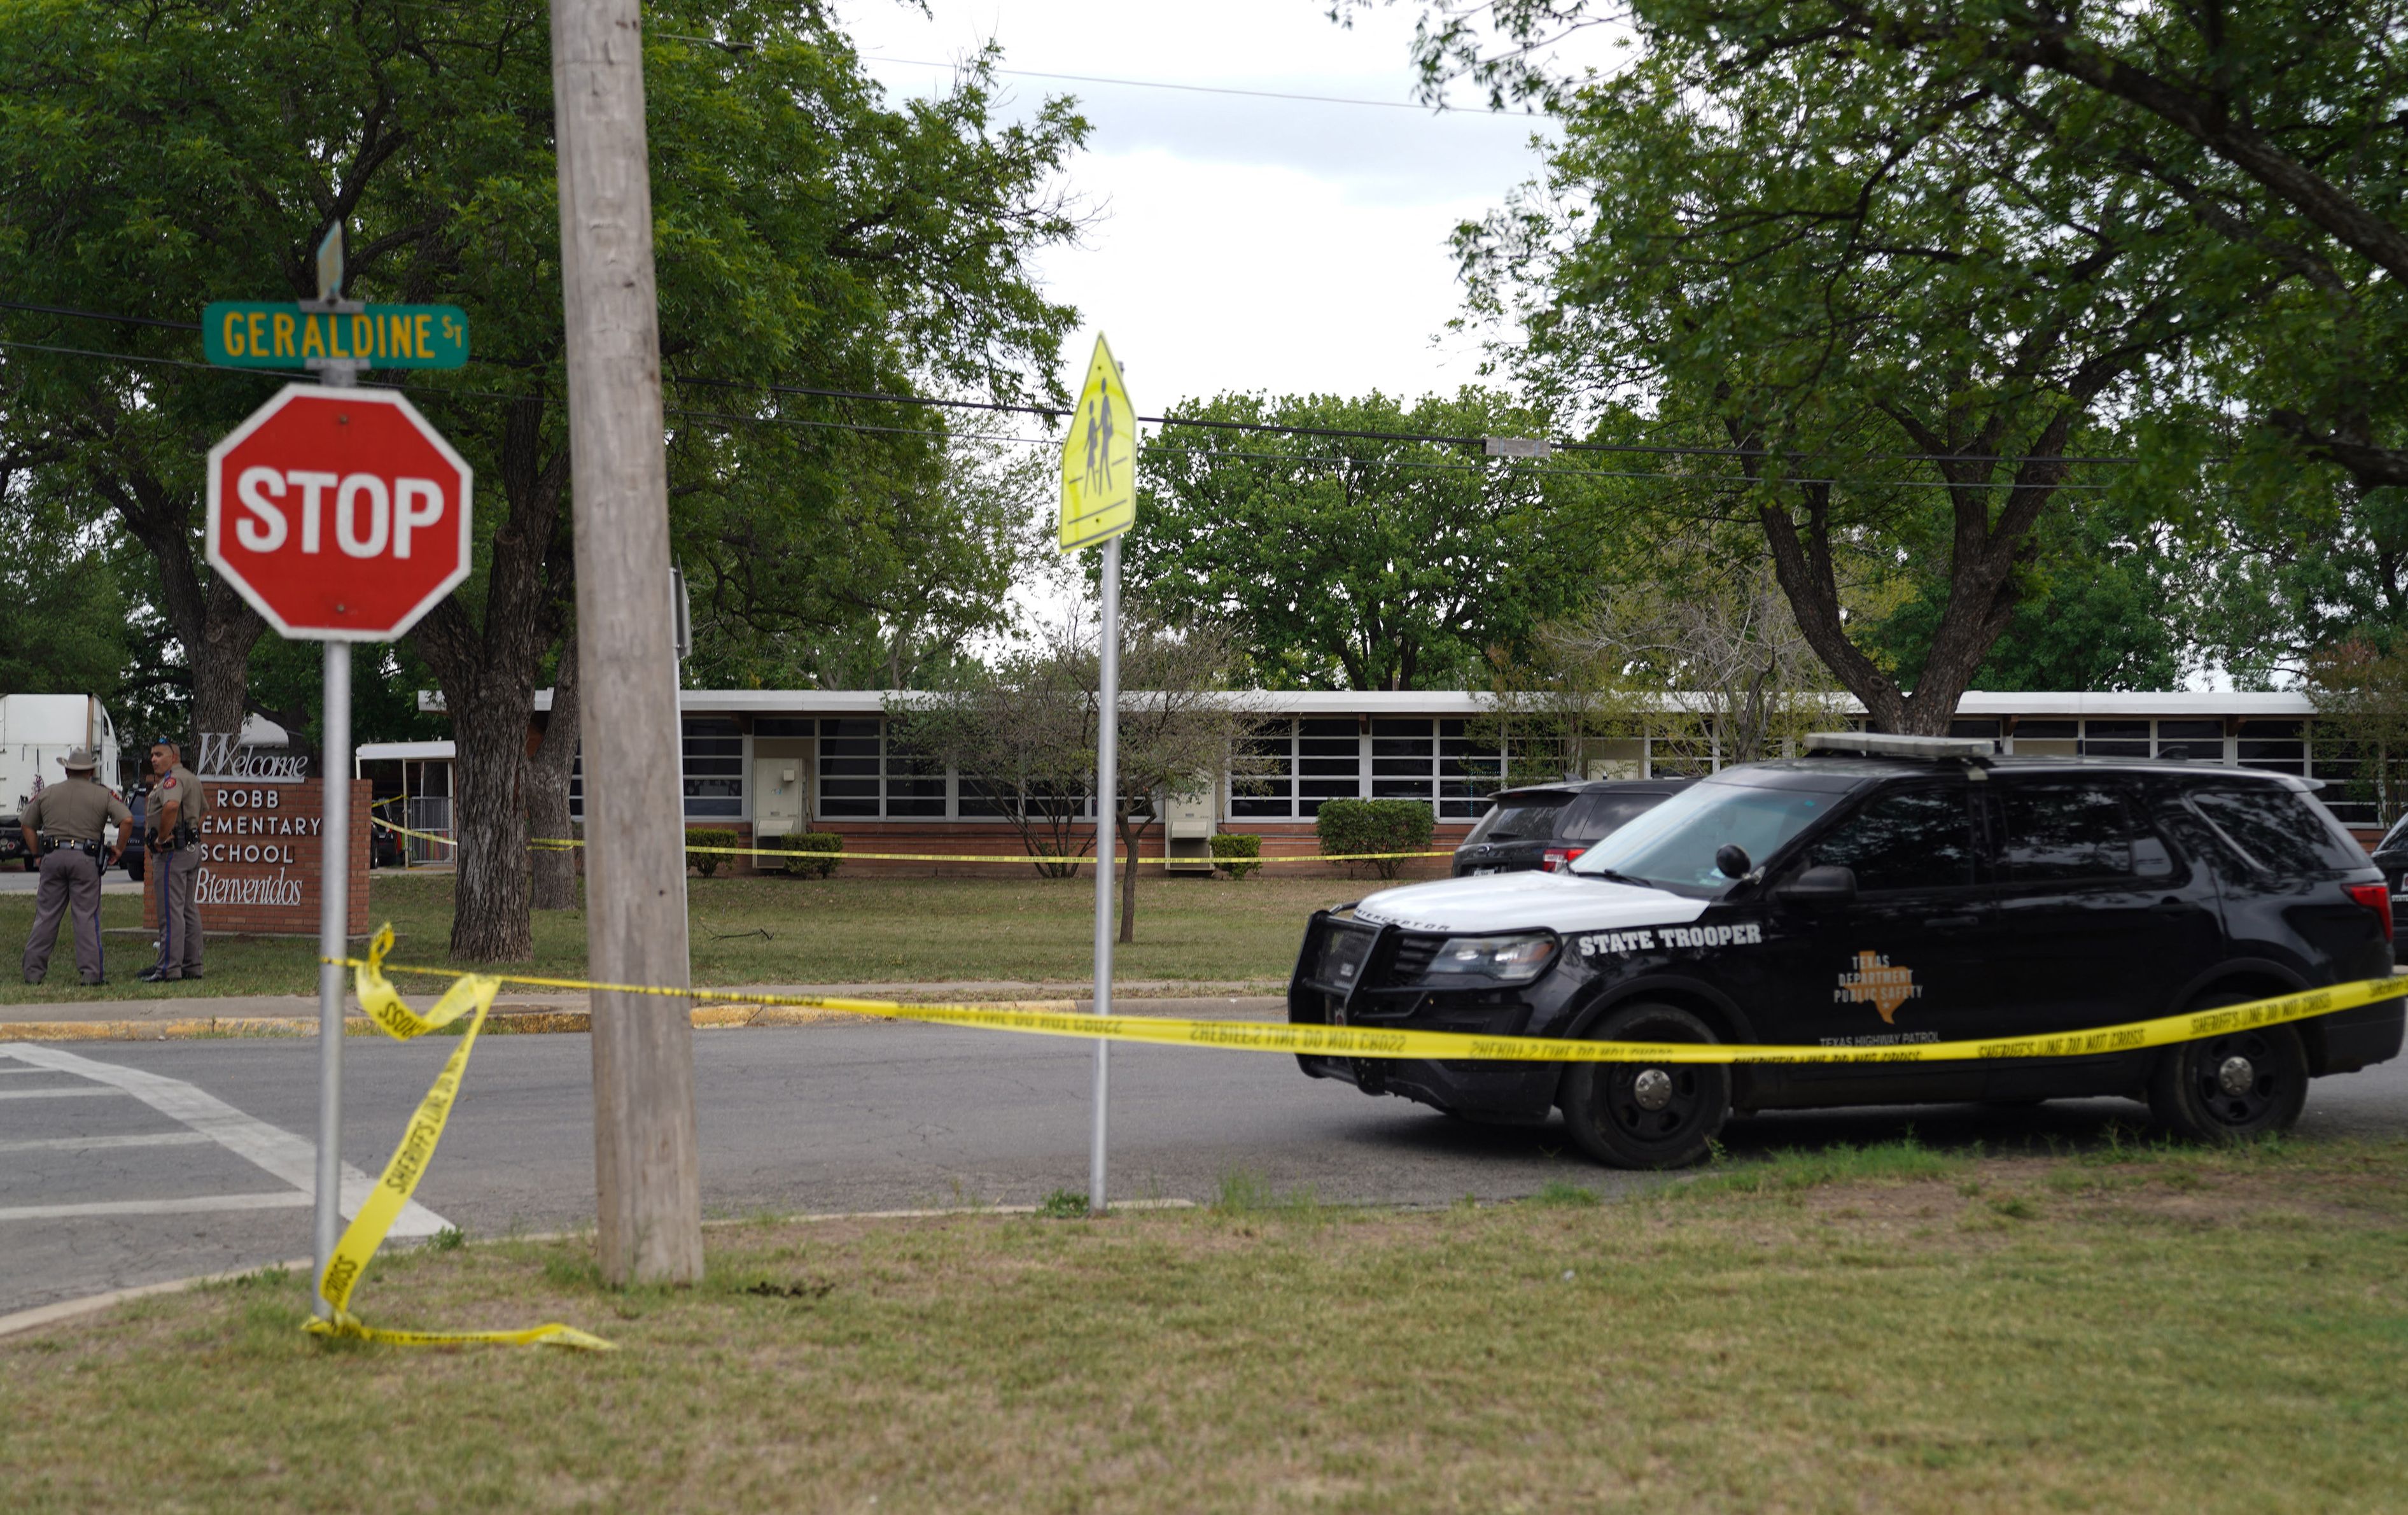 Sheriff crime scene tape is seen outside of Robb Elementary School as State troopers guard the area in Uvalde, Texas, on May 24, 2022.